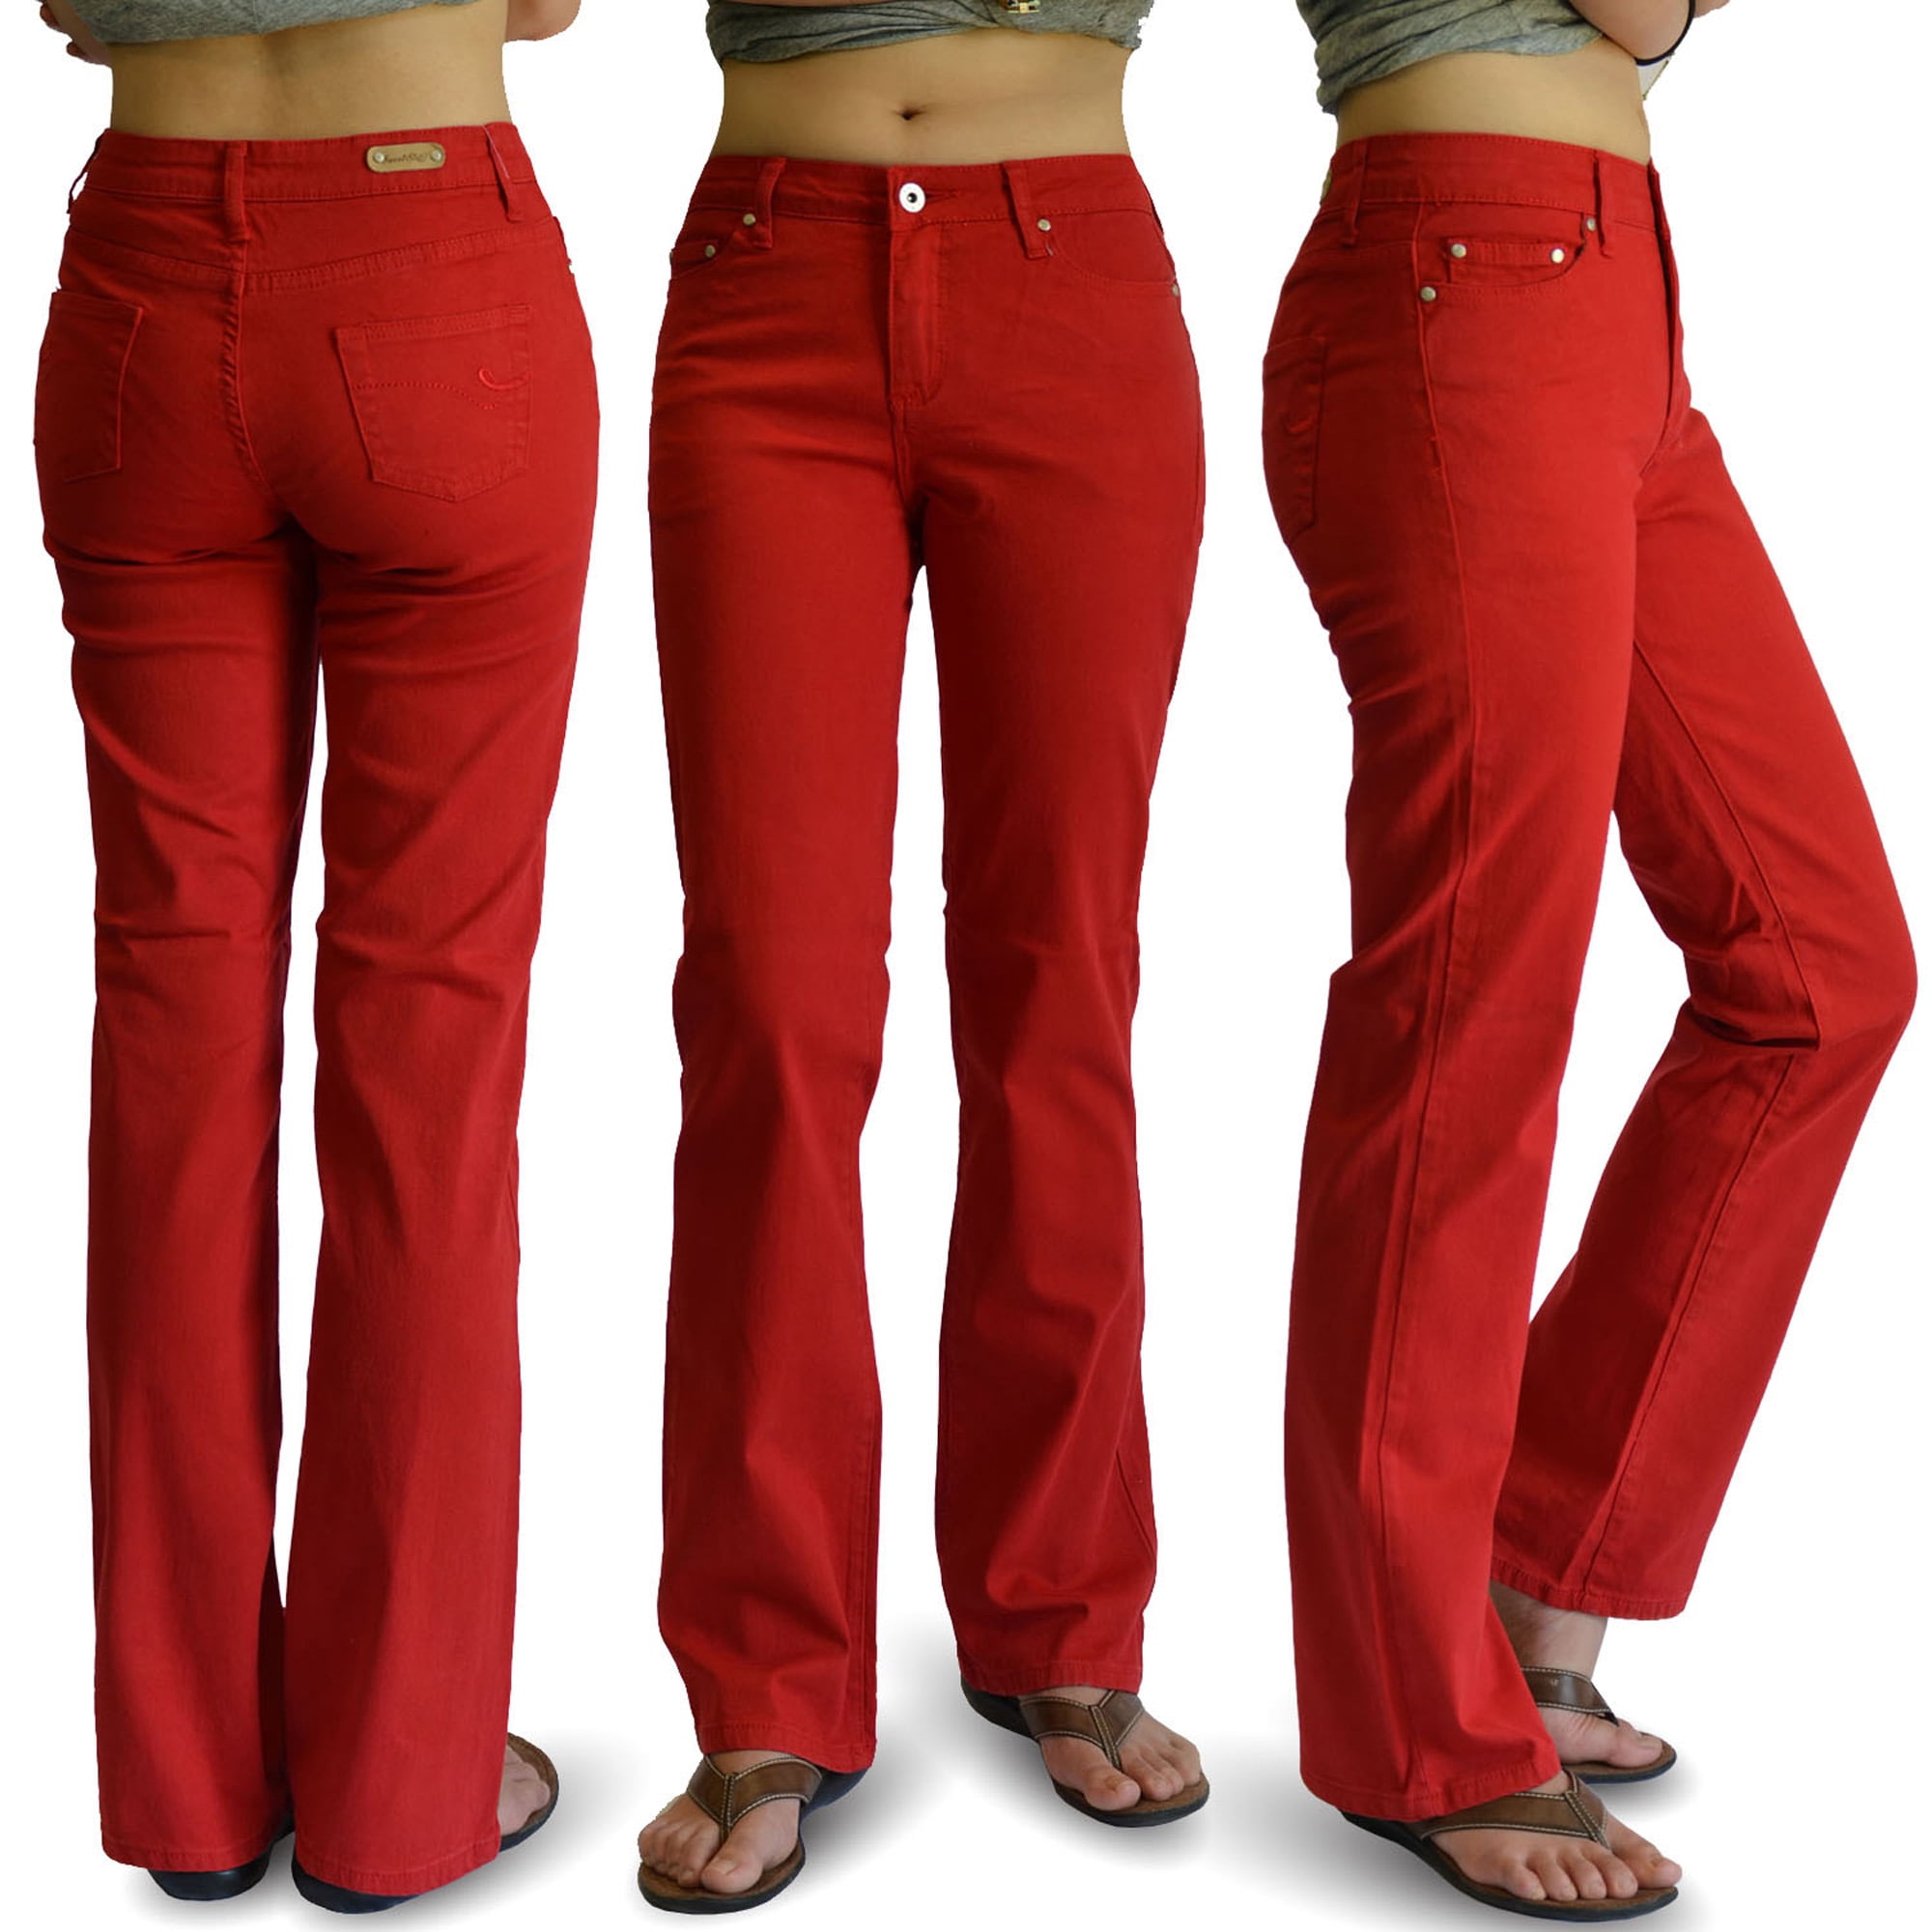 Keep In Touch - WOMENS DENIM STRETCH JEANS 5834-red SIZE:17 - Walmart ...